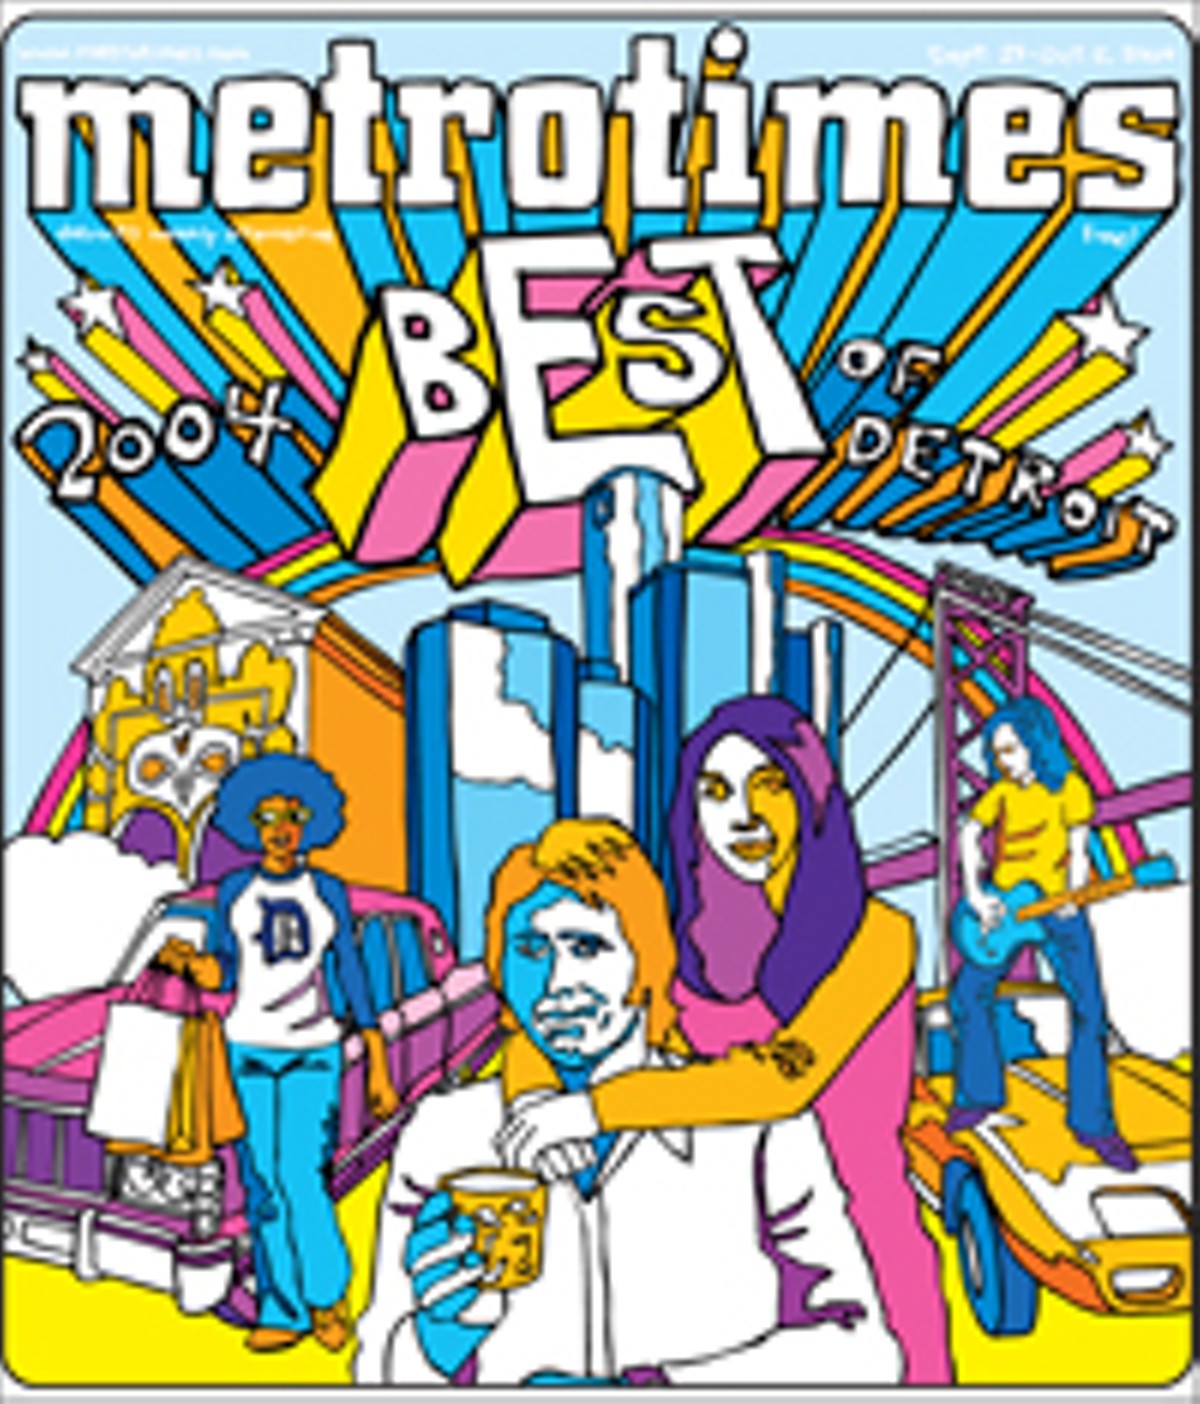 Best of Detroit 2004 Issue Cover